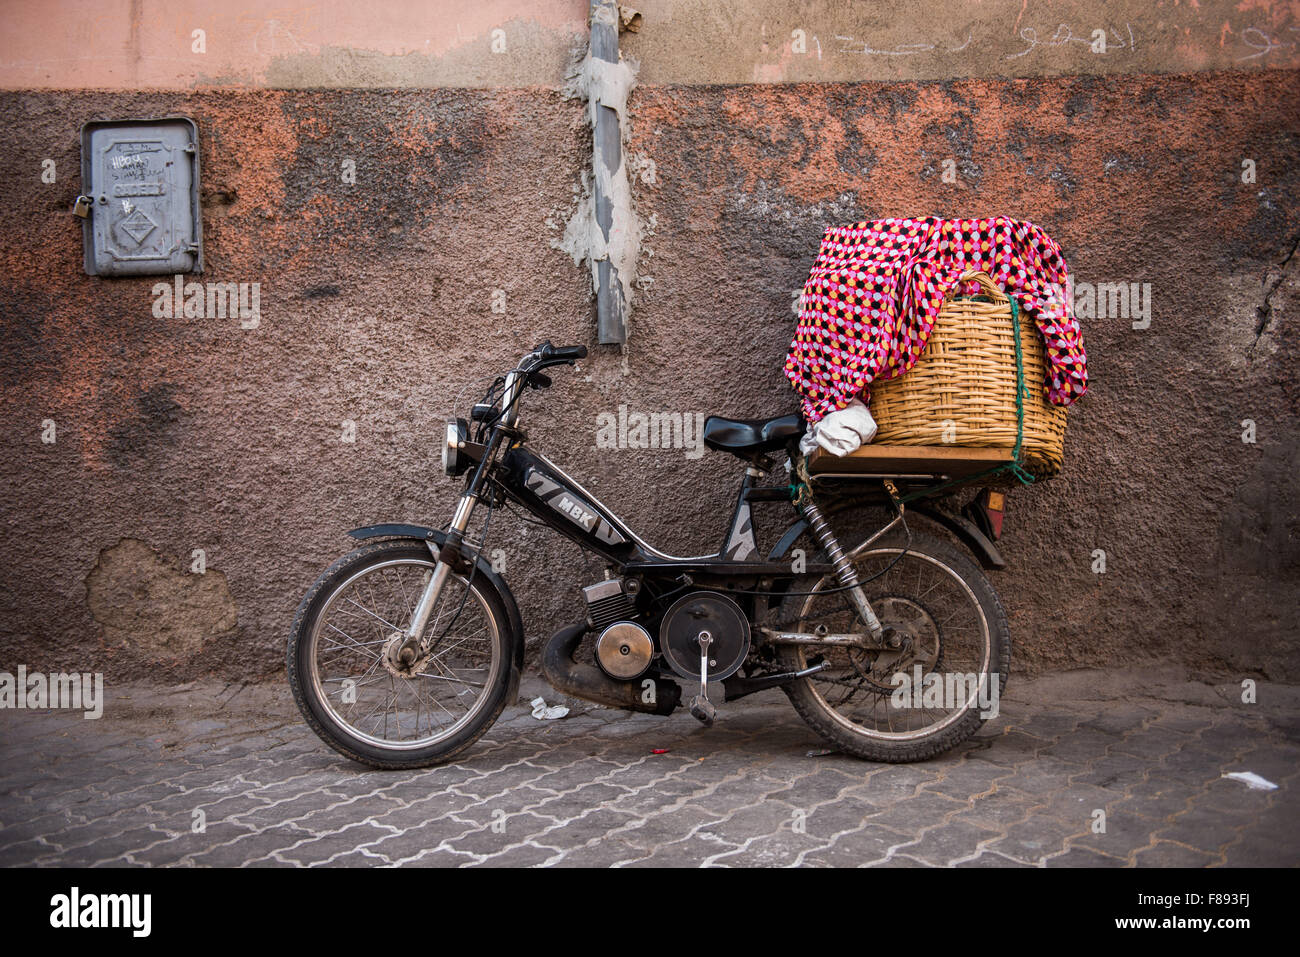 Moped with large basket on the back parked in the street in Marrakesh Stock Photo